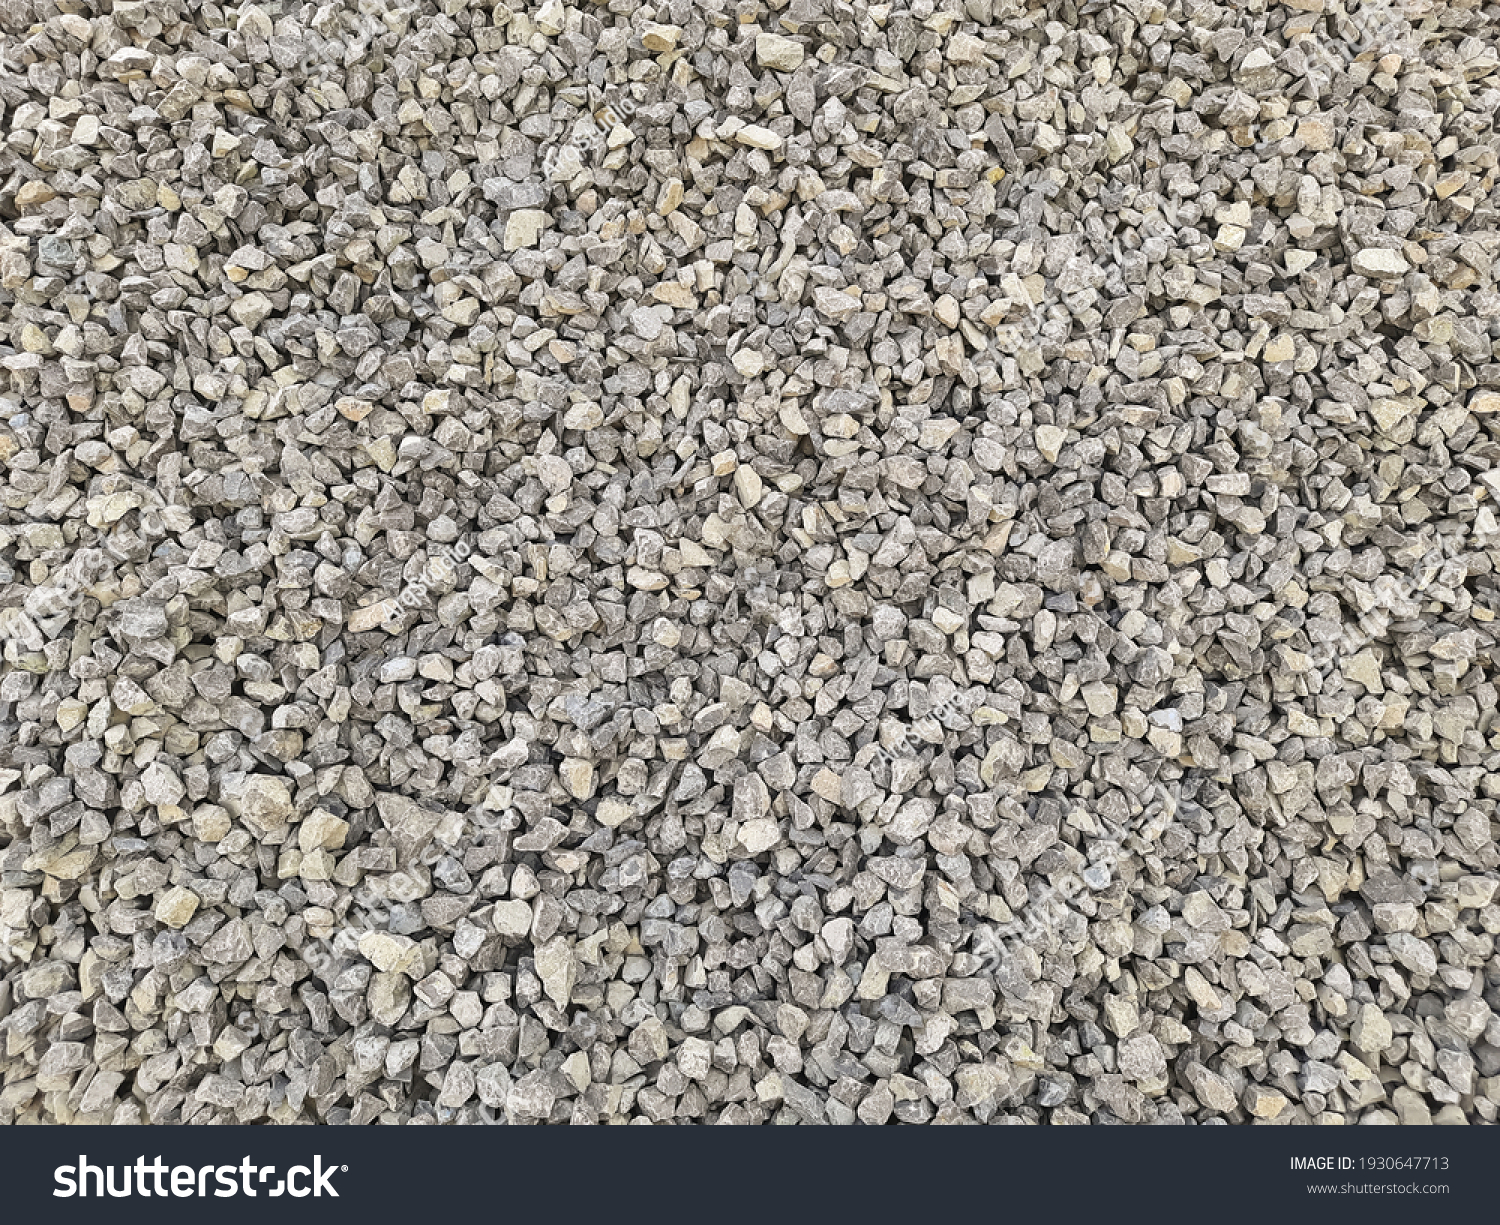 Gray small rocks ground texture. black small road stone background. gravel pebbles stone seamless texture, marble. dark background of crushed granite gravel, close up. grey clumping clay #1930647713